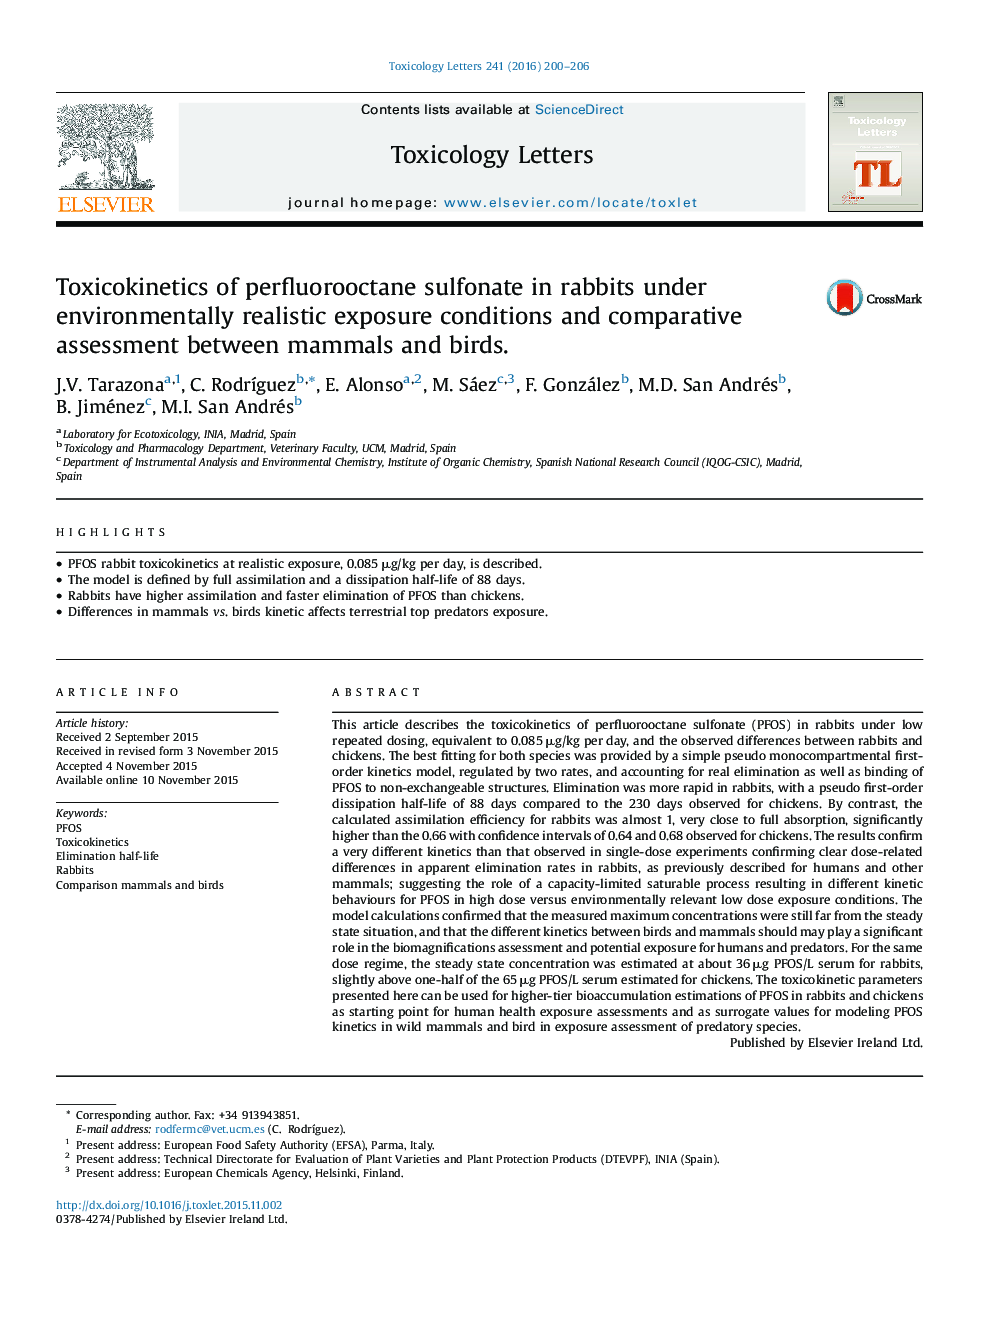 Toxicokinetics of perfluorooctane sulfonate in rabbits under environmentally realistic exposure conditions and comparative assessment between mammals and birds.